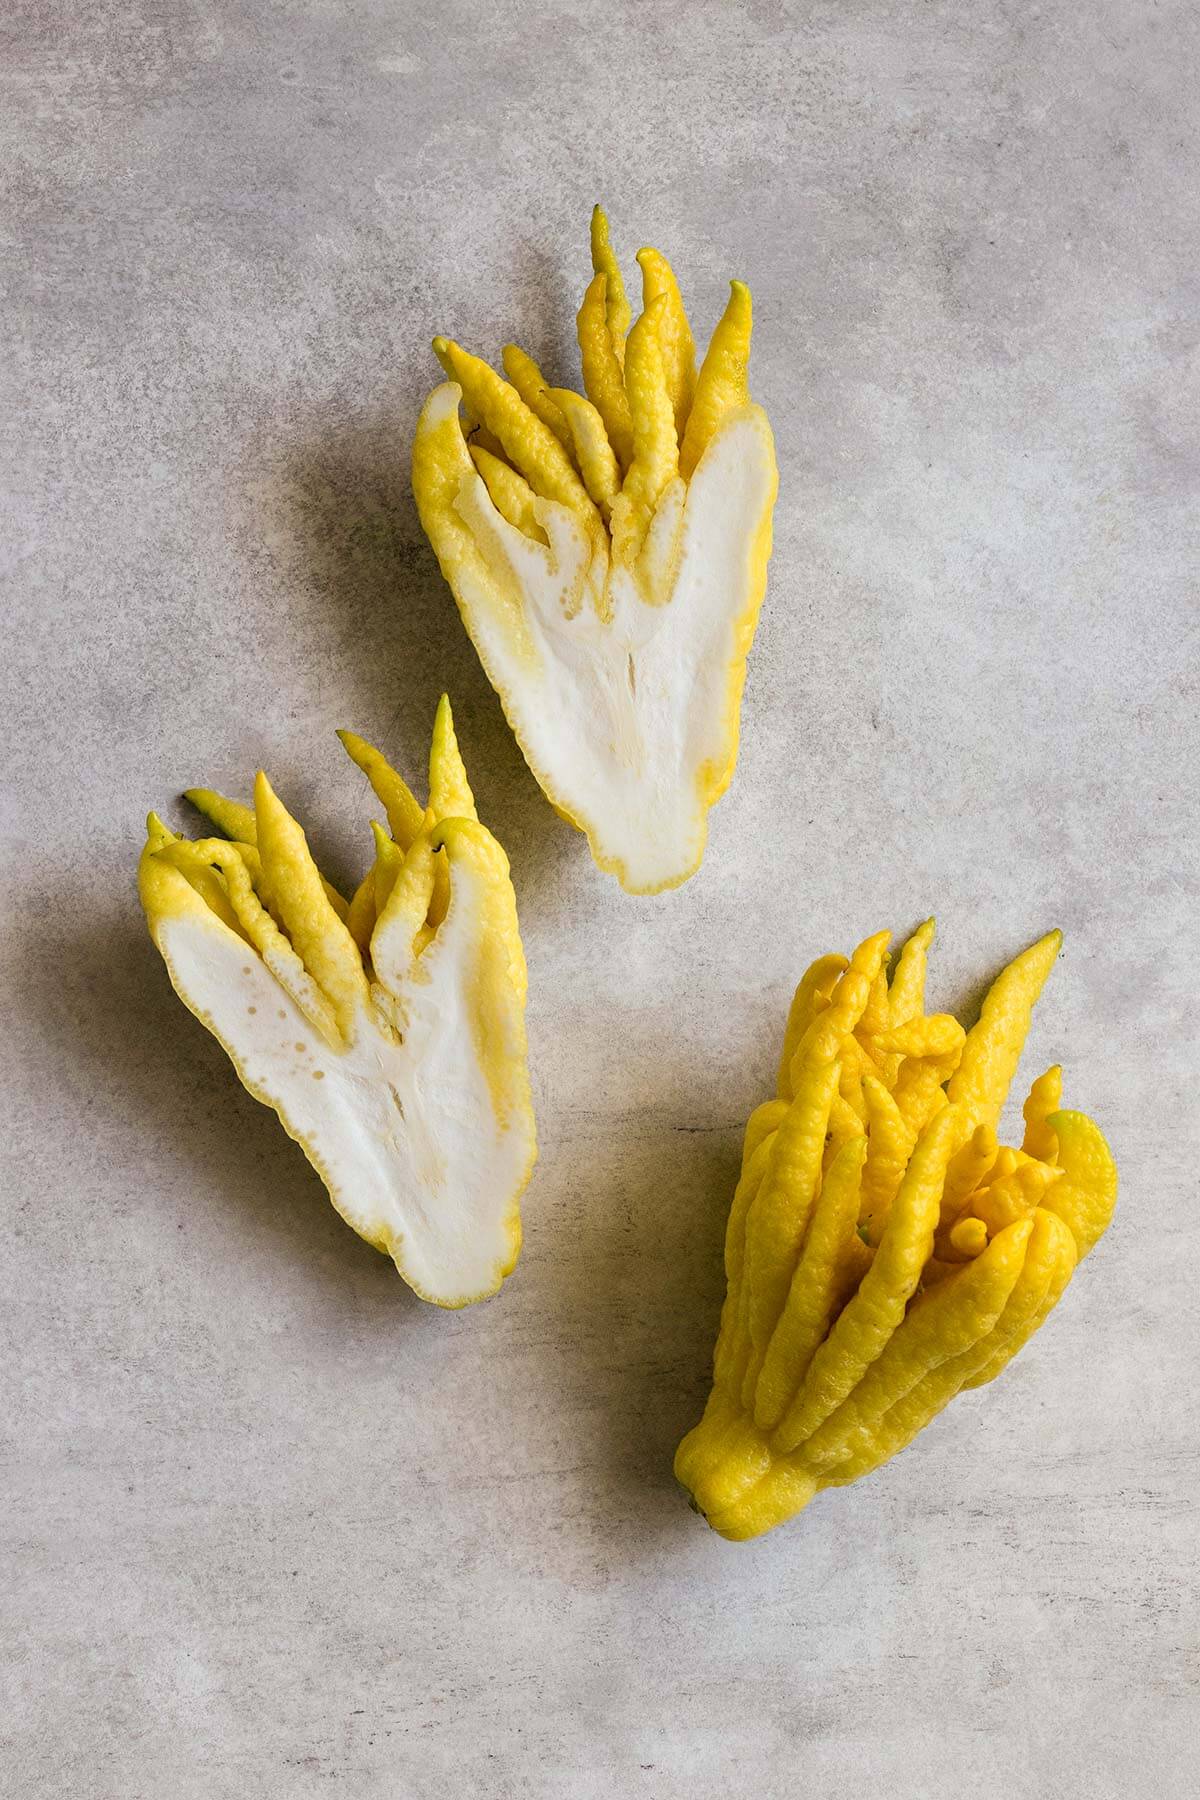 a photo of a buddha's hand citron fruit whole and cut in half showing the pithy interior